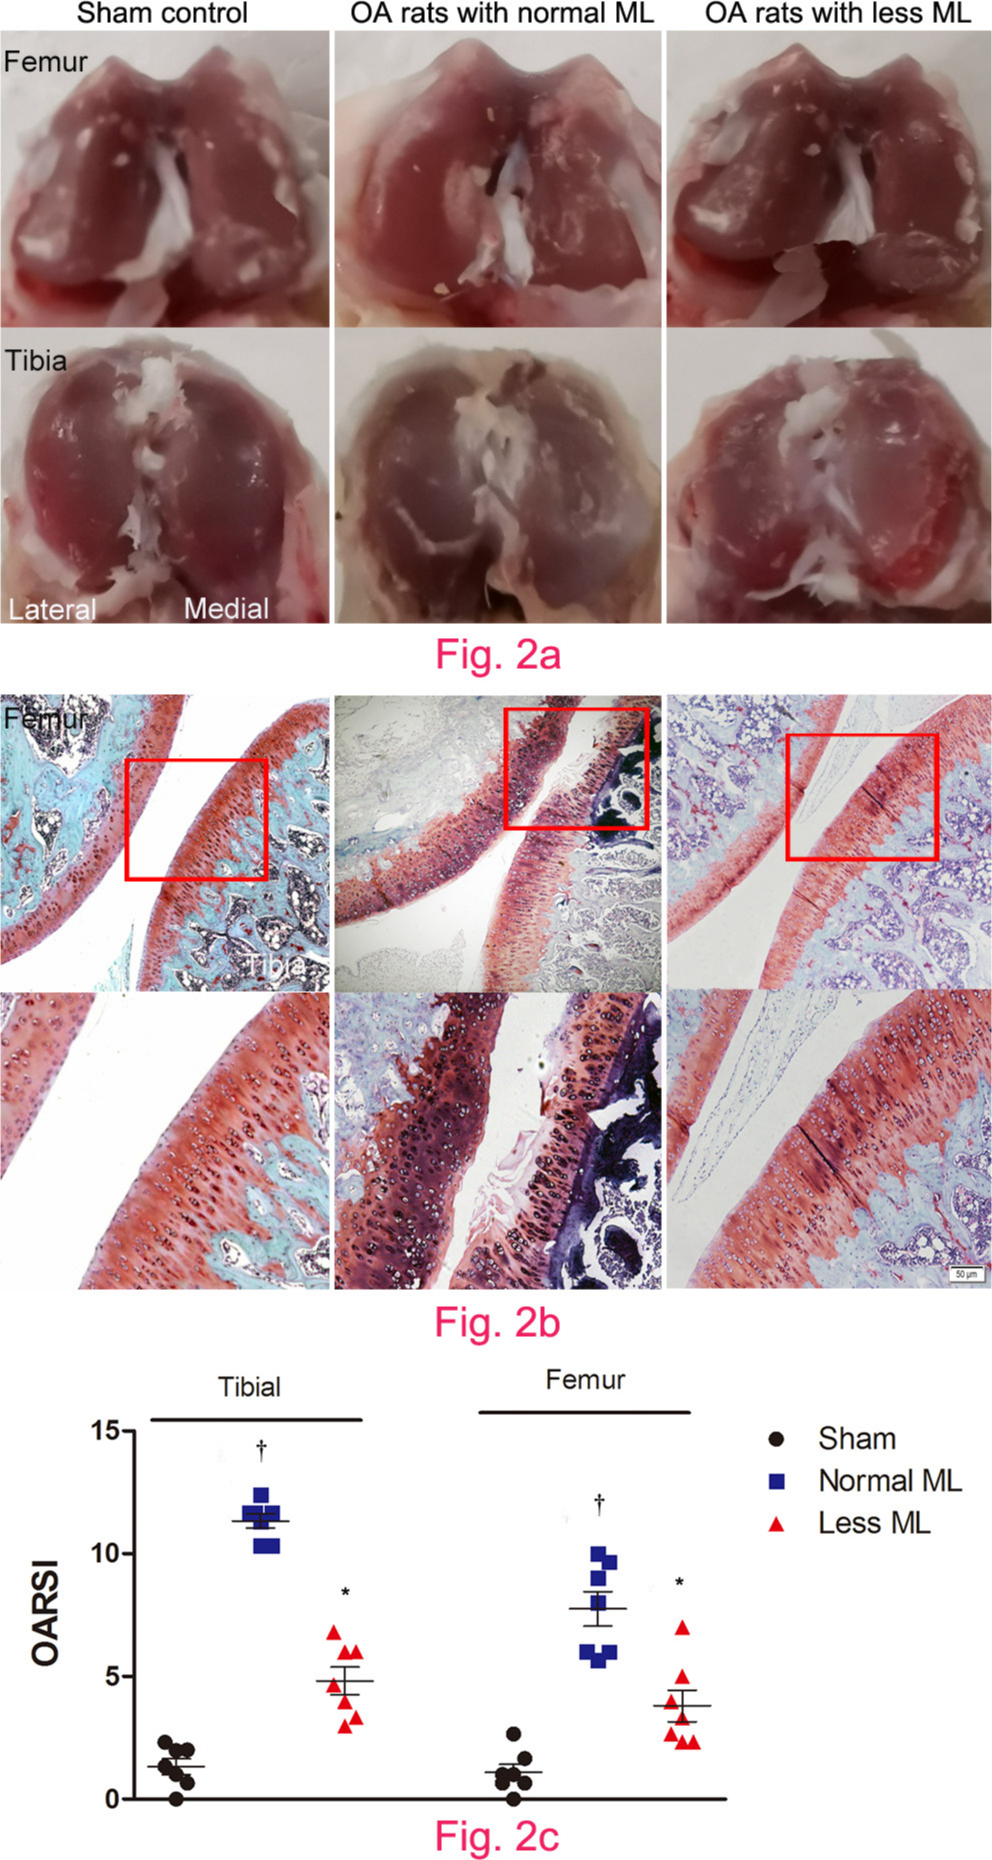 Fig. 2 
            Less mechanical loading (ML) attenuated articular cartilage degeneration in an osteoarthritis (OA) rat. a) Gross appearance of the articular cartilage in the normal ML group showed that joint surface was rough with focal defects in the proximal medial tibial plateau (lower panel), while smooth joint surface was present in the less ML joint articular cartilage. b) Safranin O and Fast Green staining demonstrated that there were some clefts and breakdown in the cartilage in OA rats with normal ML. a) and b) However, articular surface was relatively smooth and there was no evidence of breakdown in OA rats in the less ML group. c) Furthermore, the Osteoarthritis Research Society International (OARSI) scores in both tibial and femur cartilage were greater in the OA rats with normal ML than that of OA rats with less ML. Scale bar: 50 μm. Values are presented as mean and standard error of the mean (SEM). One-way analysis of variance (ANOVA) was used, *p < 0.001 between OA rats with normal and less ML. †p < 0.001 between sham controls and OA rats with normal ML. Magnification of upper panel in Fig. 2b was 100×, and lower panel was 400×.
          